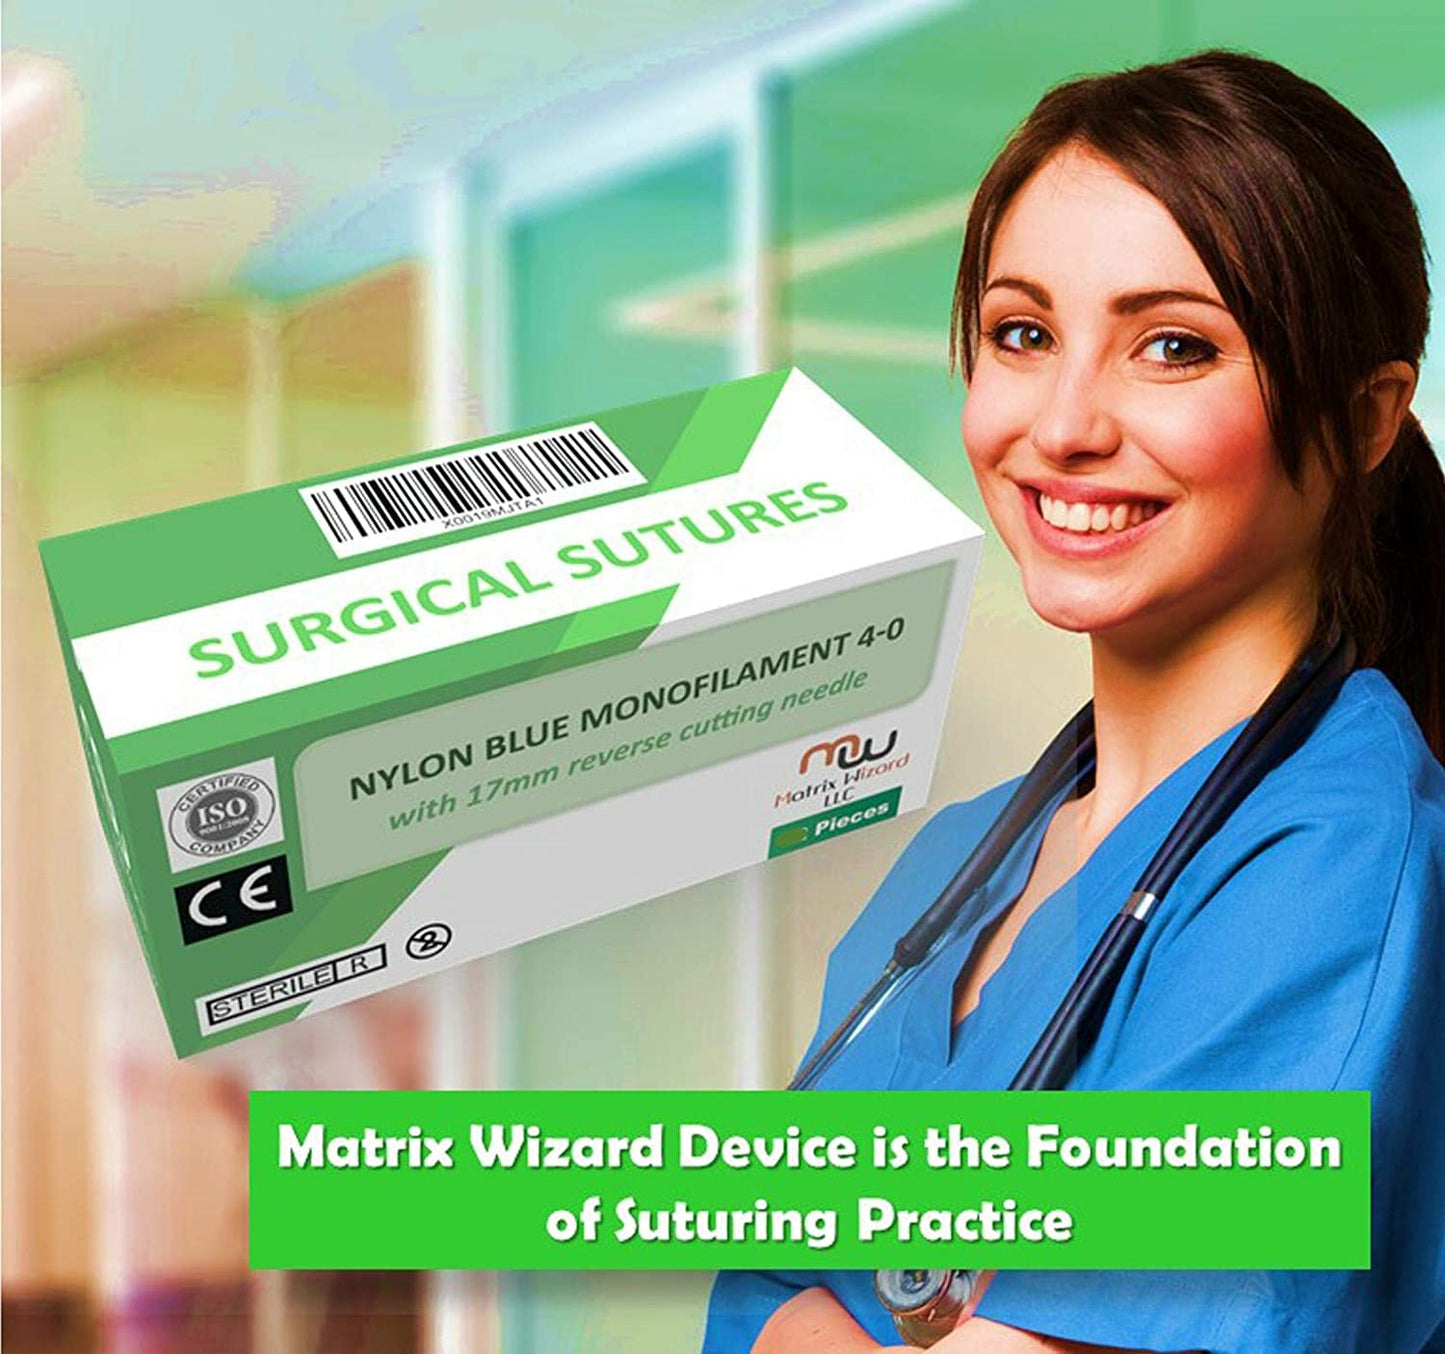 4-0 Sterile Suture Threads with Needle (24 PK Nylon) -  Med School Demo, Suturing on Silicon Suture Dummies, Clinic Rotation Suturing, Taxidermy, Veterinary Use